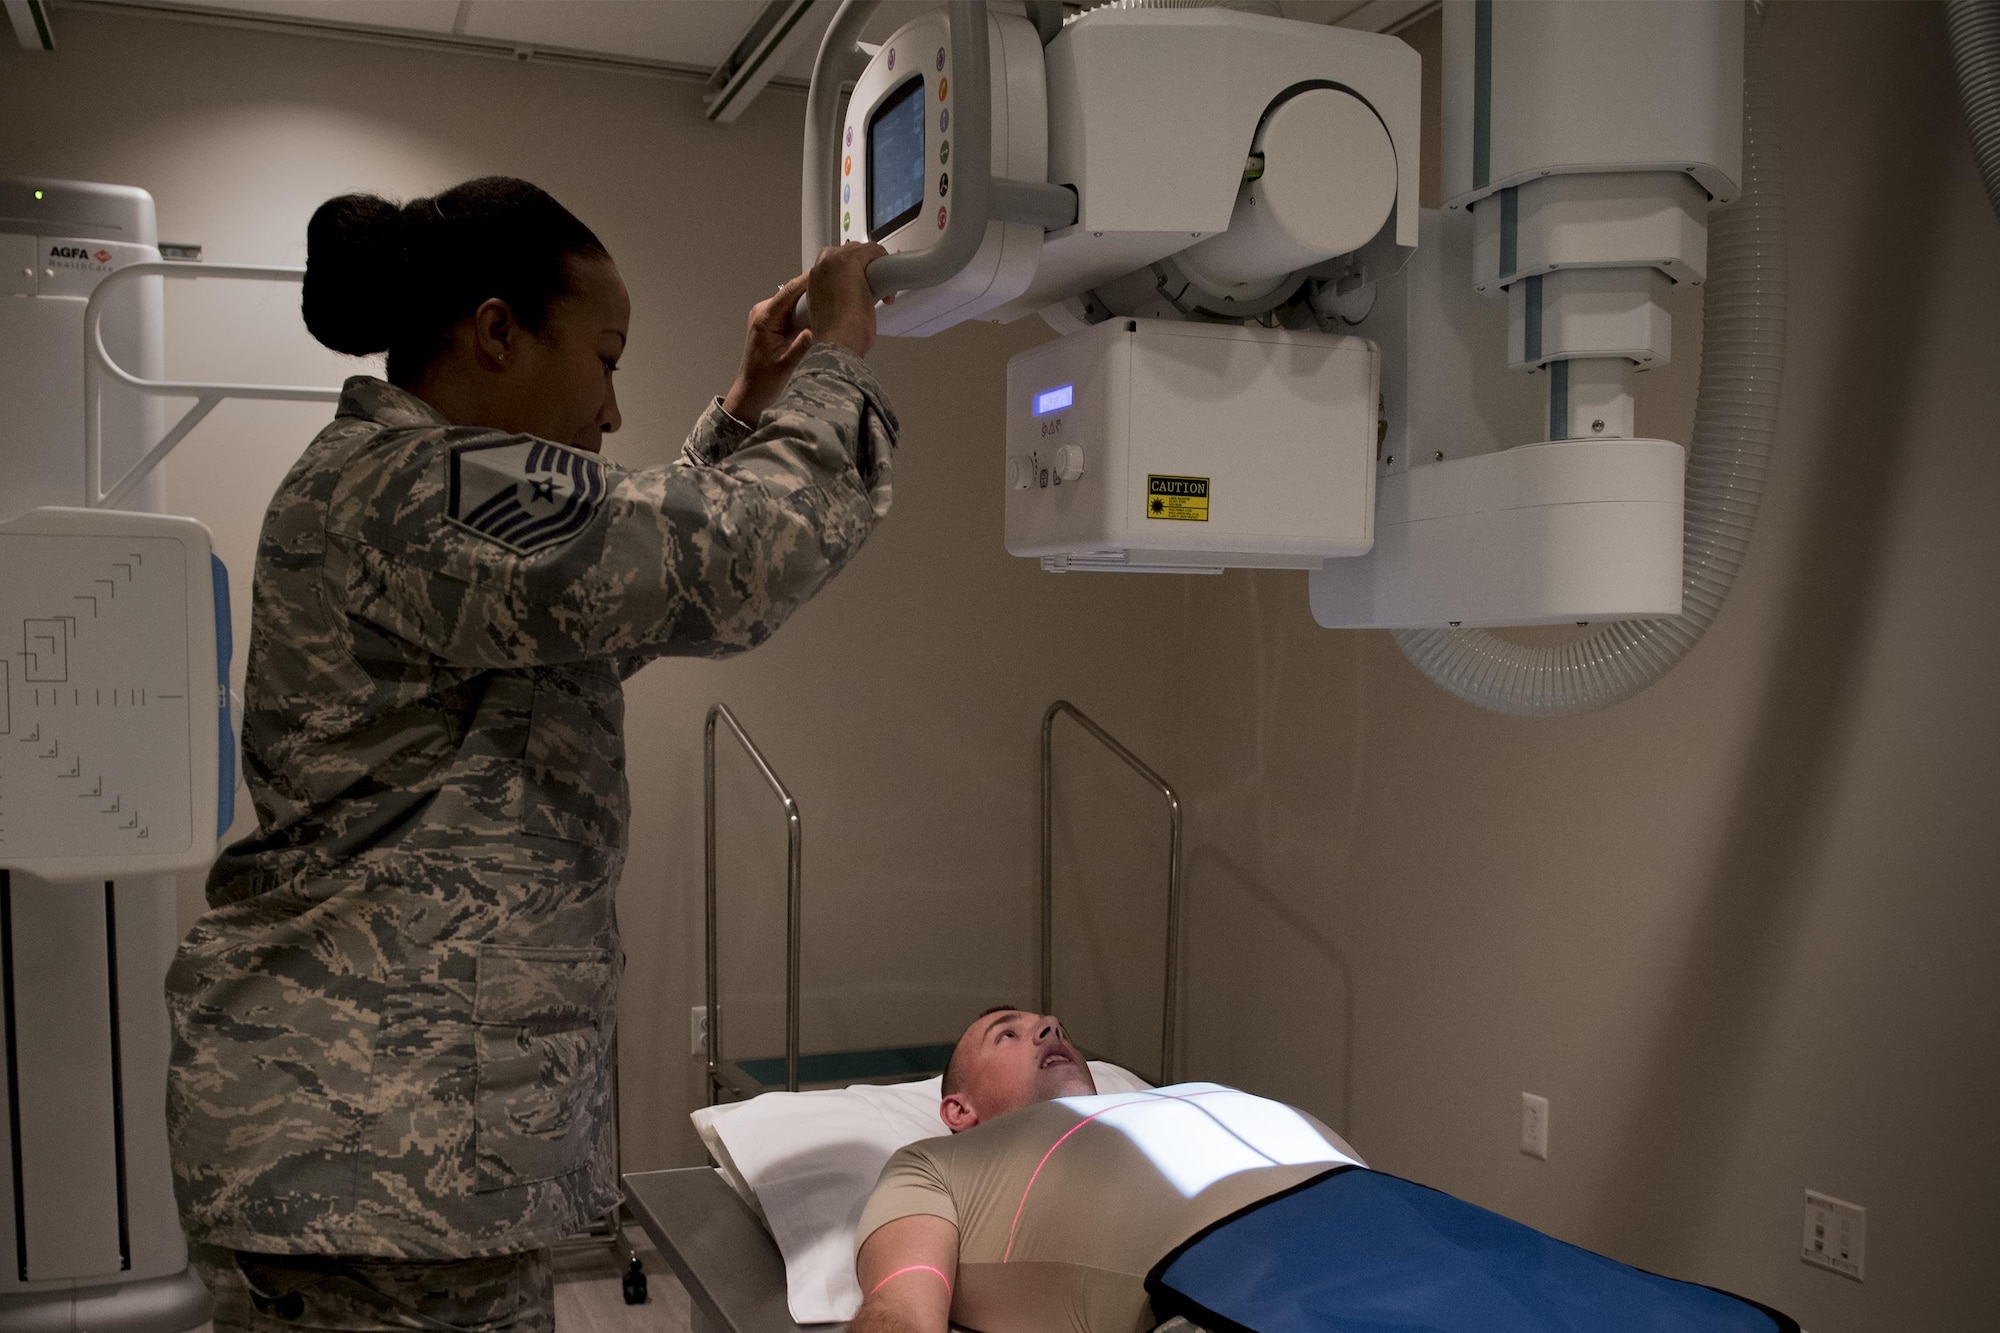 Master Sgt. Tracey McLendon, 23d Medical Support Squadron flight chief of diagnostic imaging, prepares a chest X-ray of Senior Airman Jeffrey Nelligan, 355th Medical Support Squadron diagnostic imagining technologist, Oct. 24, 2016, at Moody Air Force Base, Ga. The 23d MDSS radiology diagnostic imaging section consists of two Airmen who are responsible for the X-rays of approximately 10,000 people. (U.S. Air Force photo by Airman 1st Class Daniel Snider)
